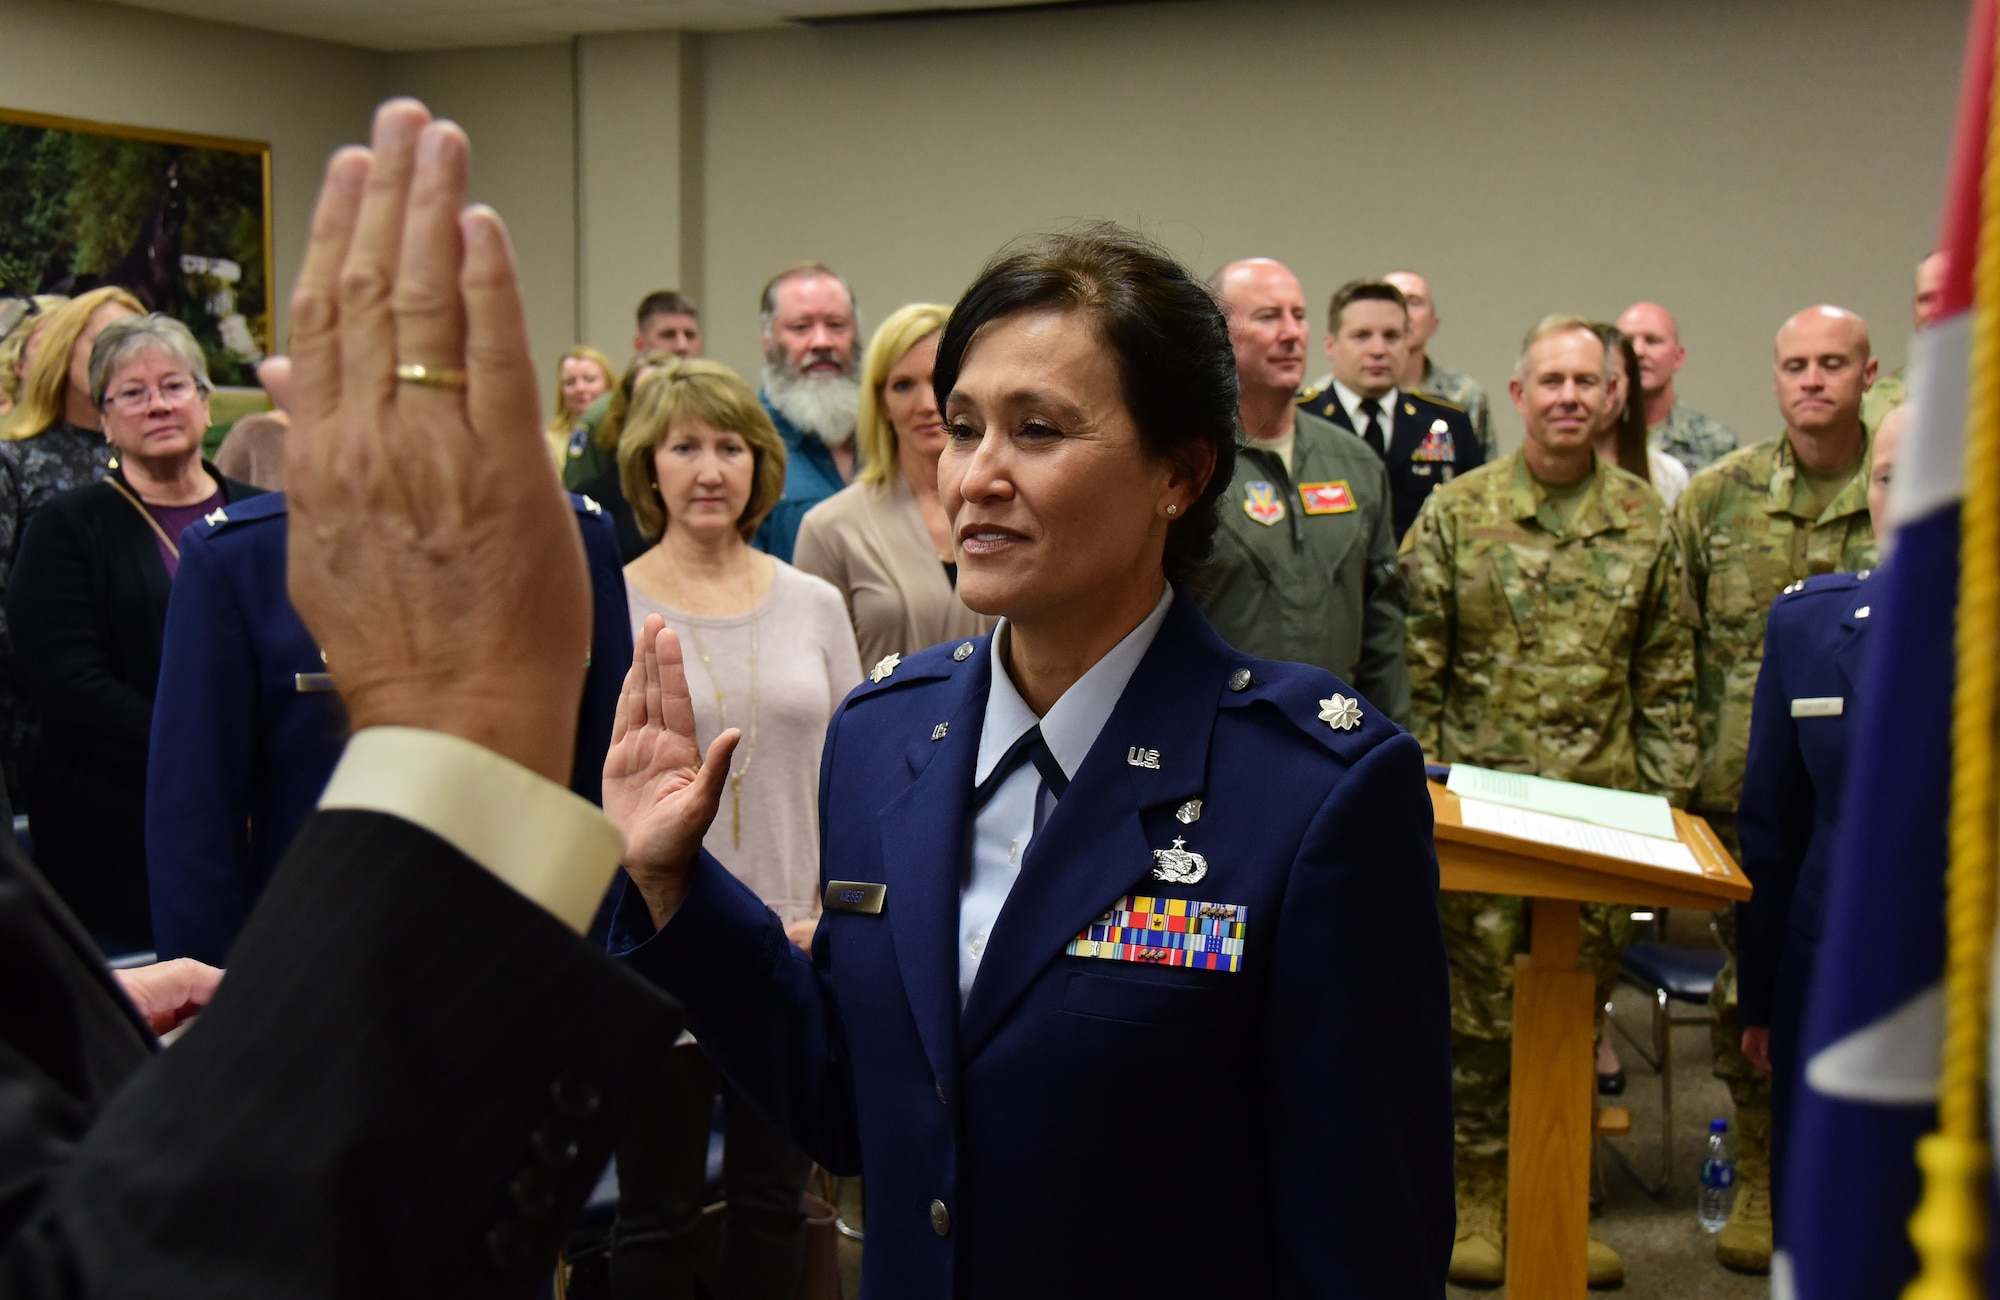 Lt. Col. Linda Kieser, a special projects officer with the 118th Wing, takes the oath of office at her promotion ceremony on Nov. 3, 2018 at Berry Field Air National Guard Base, Nashville, Tennessee.